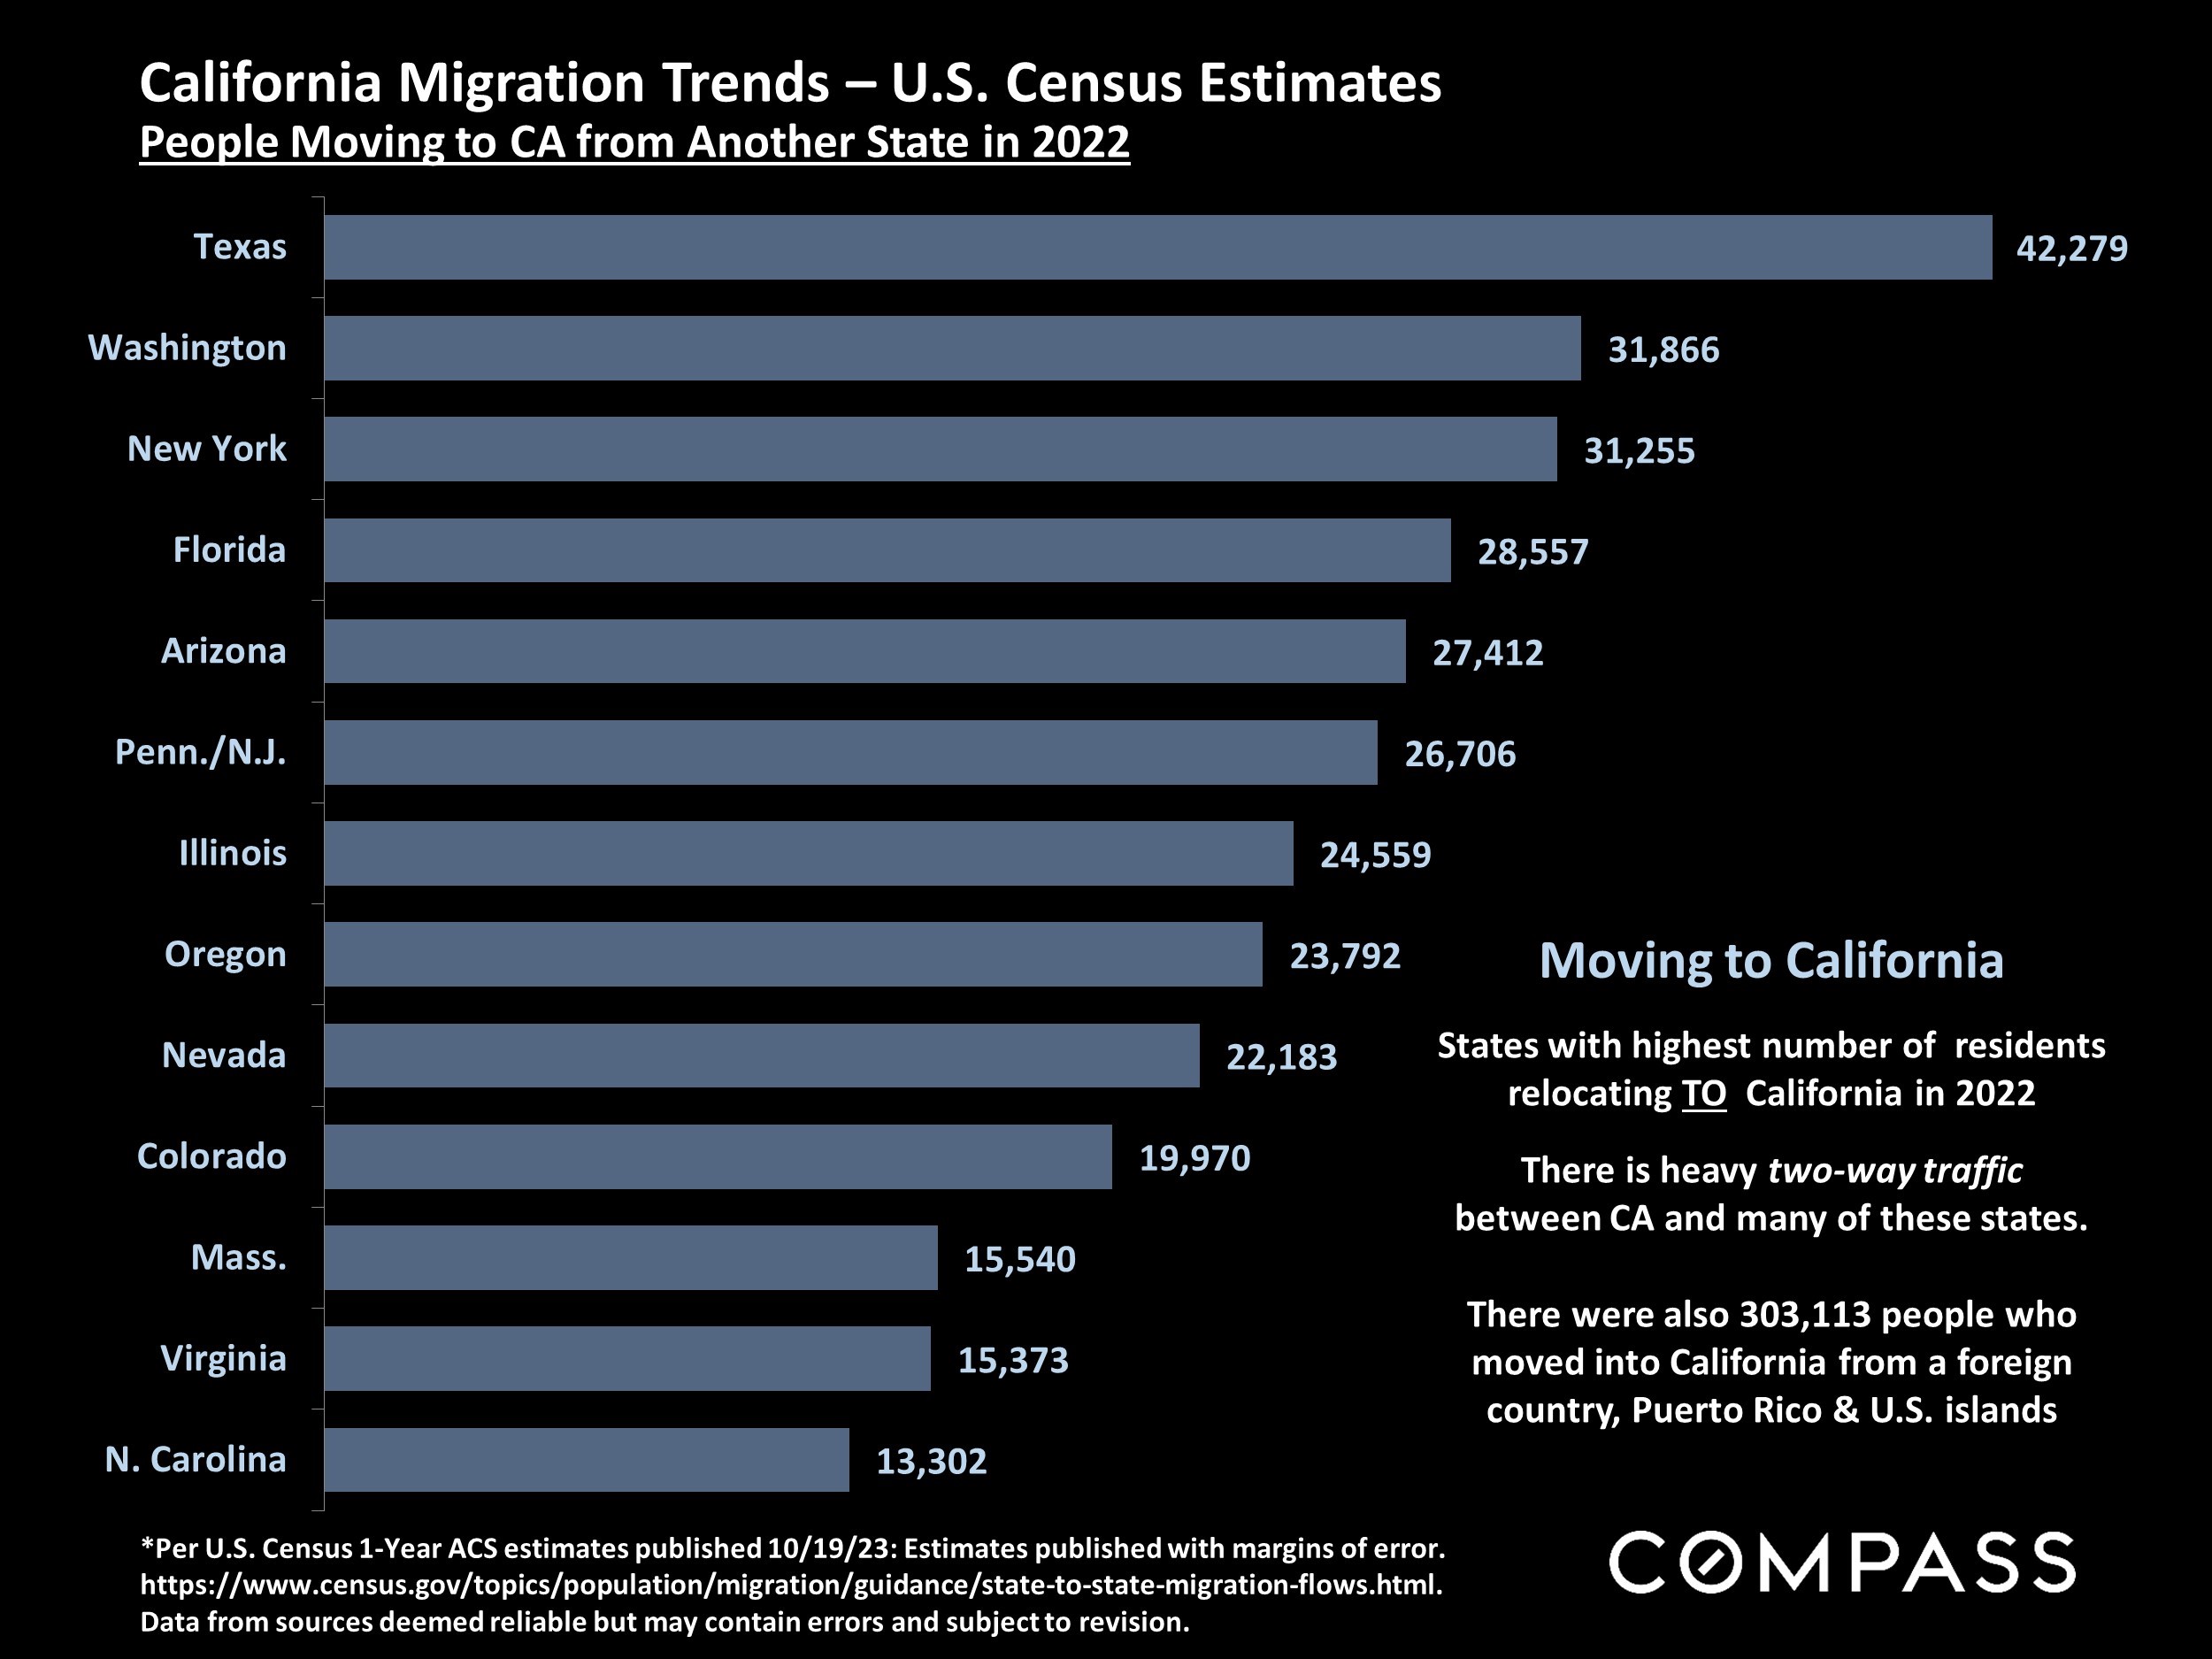 California Migration Trends - U.S. Census Estimates People Moving to CA from Another State in 2022